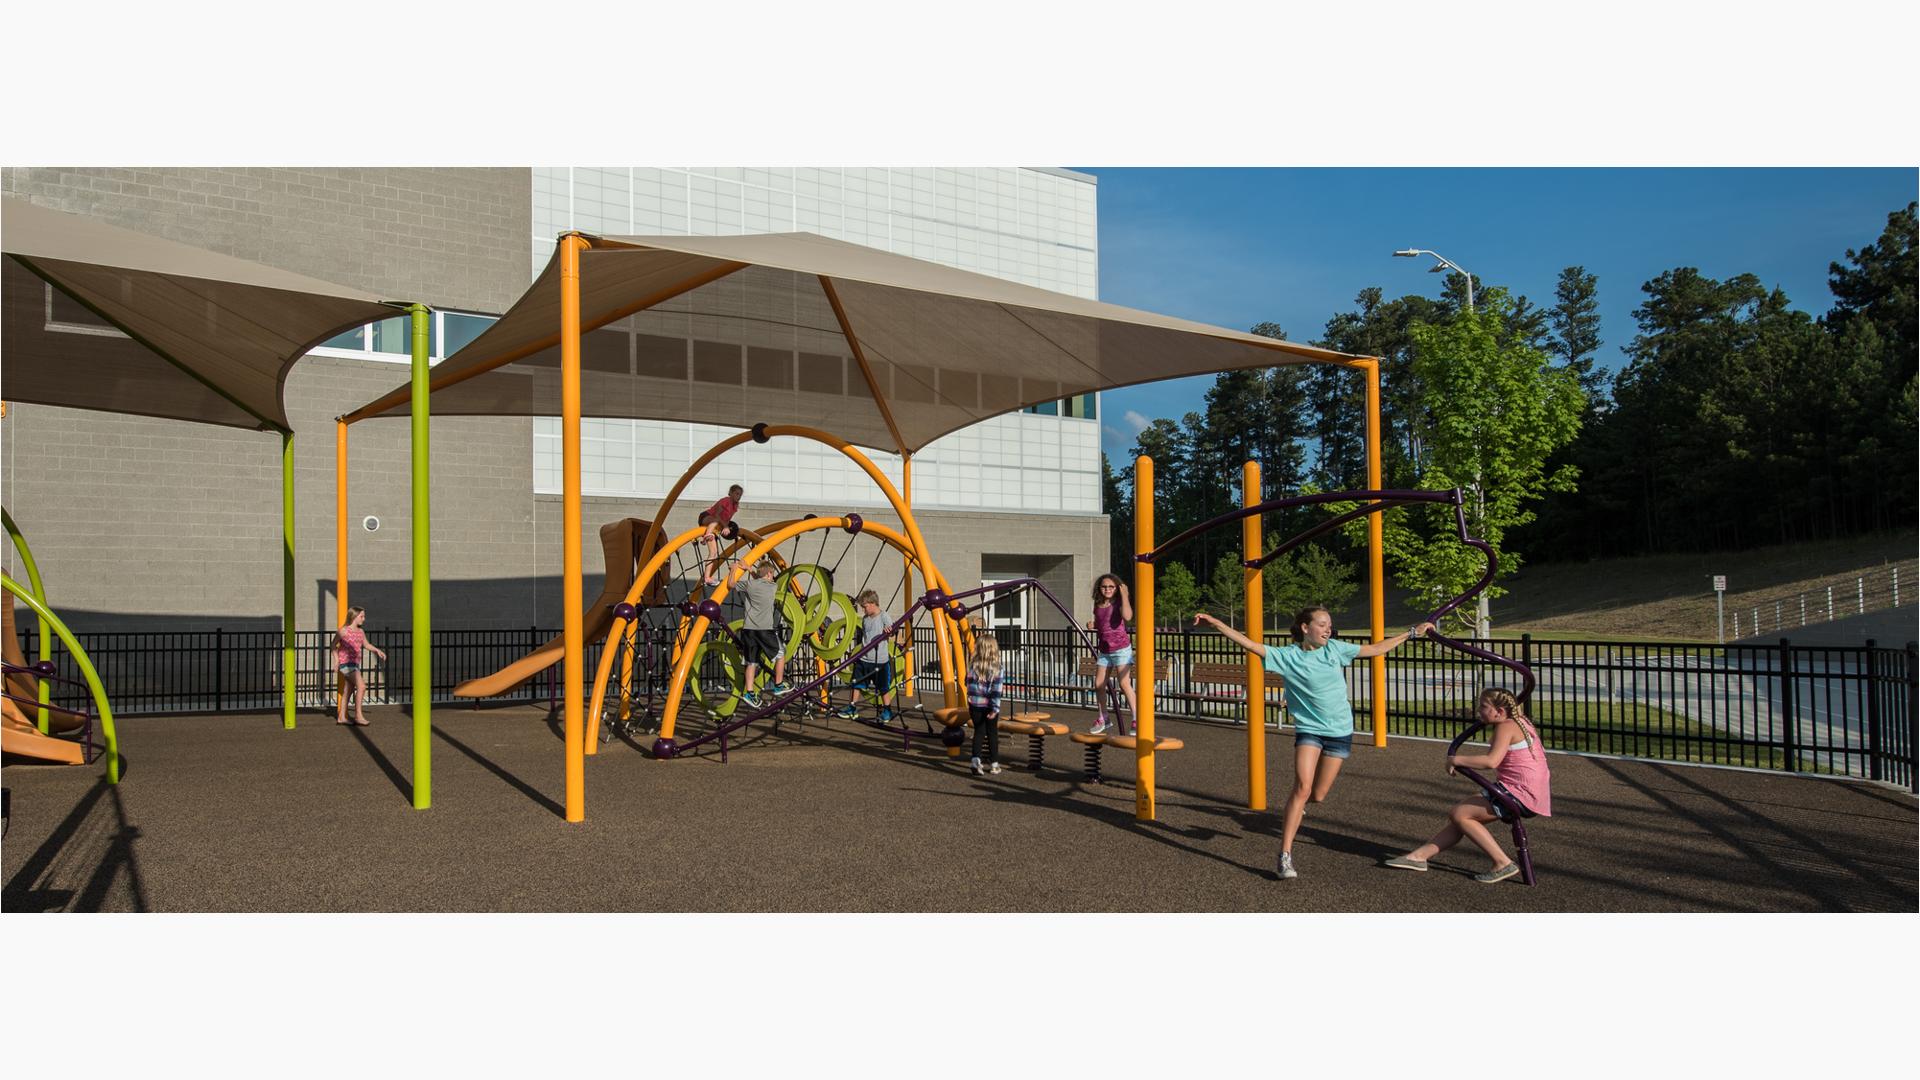 School kids playing on yellow and limon colored arched playground structure under shade structure.